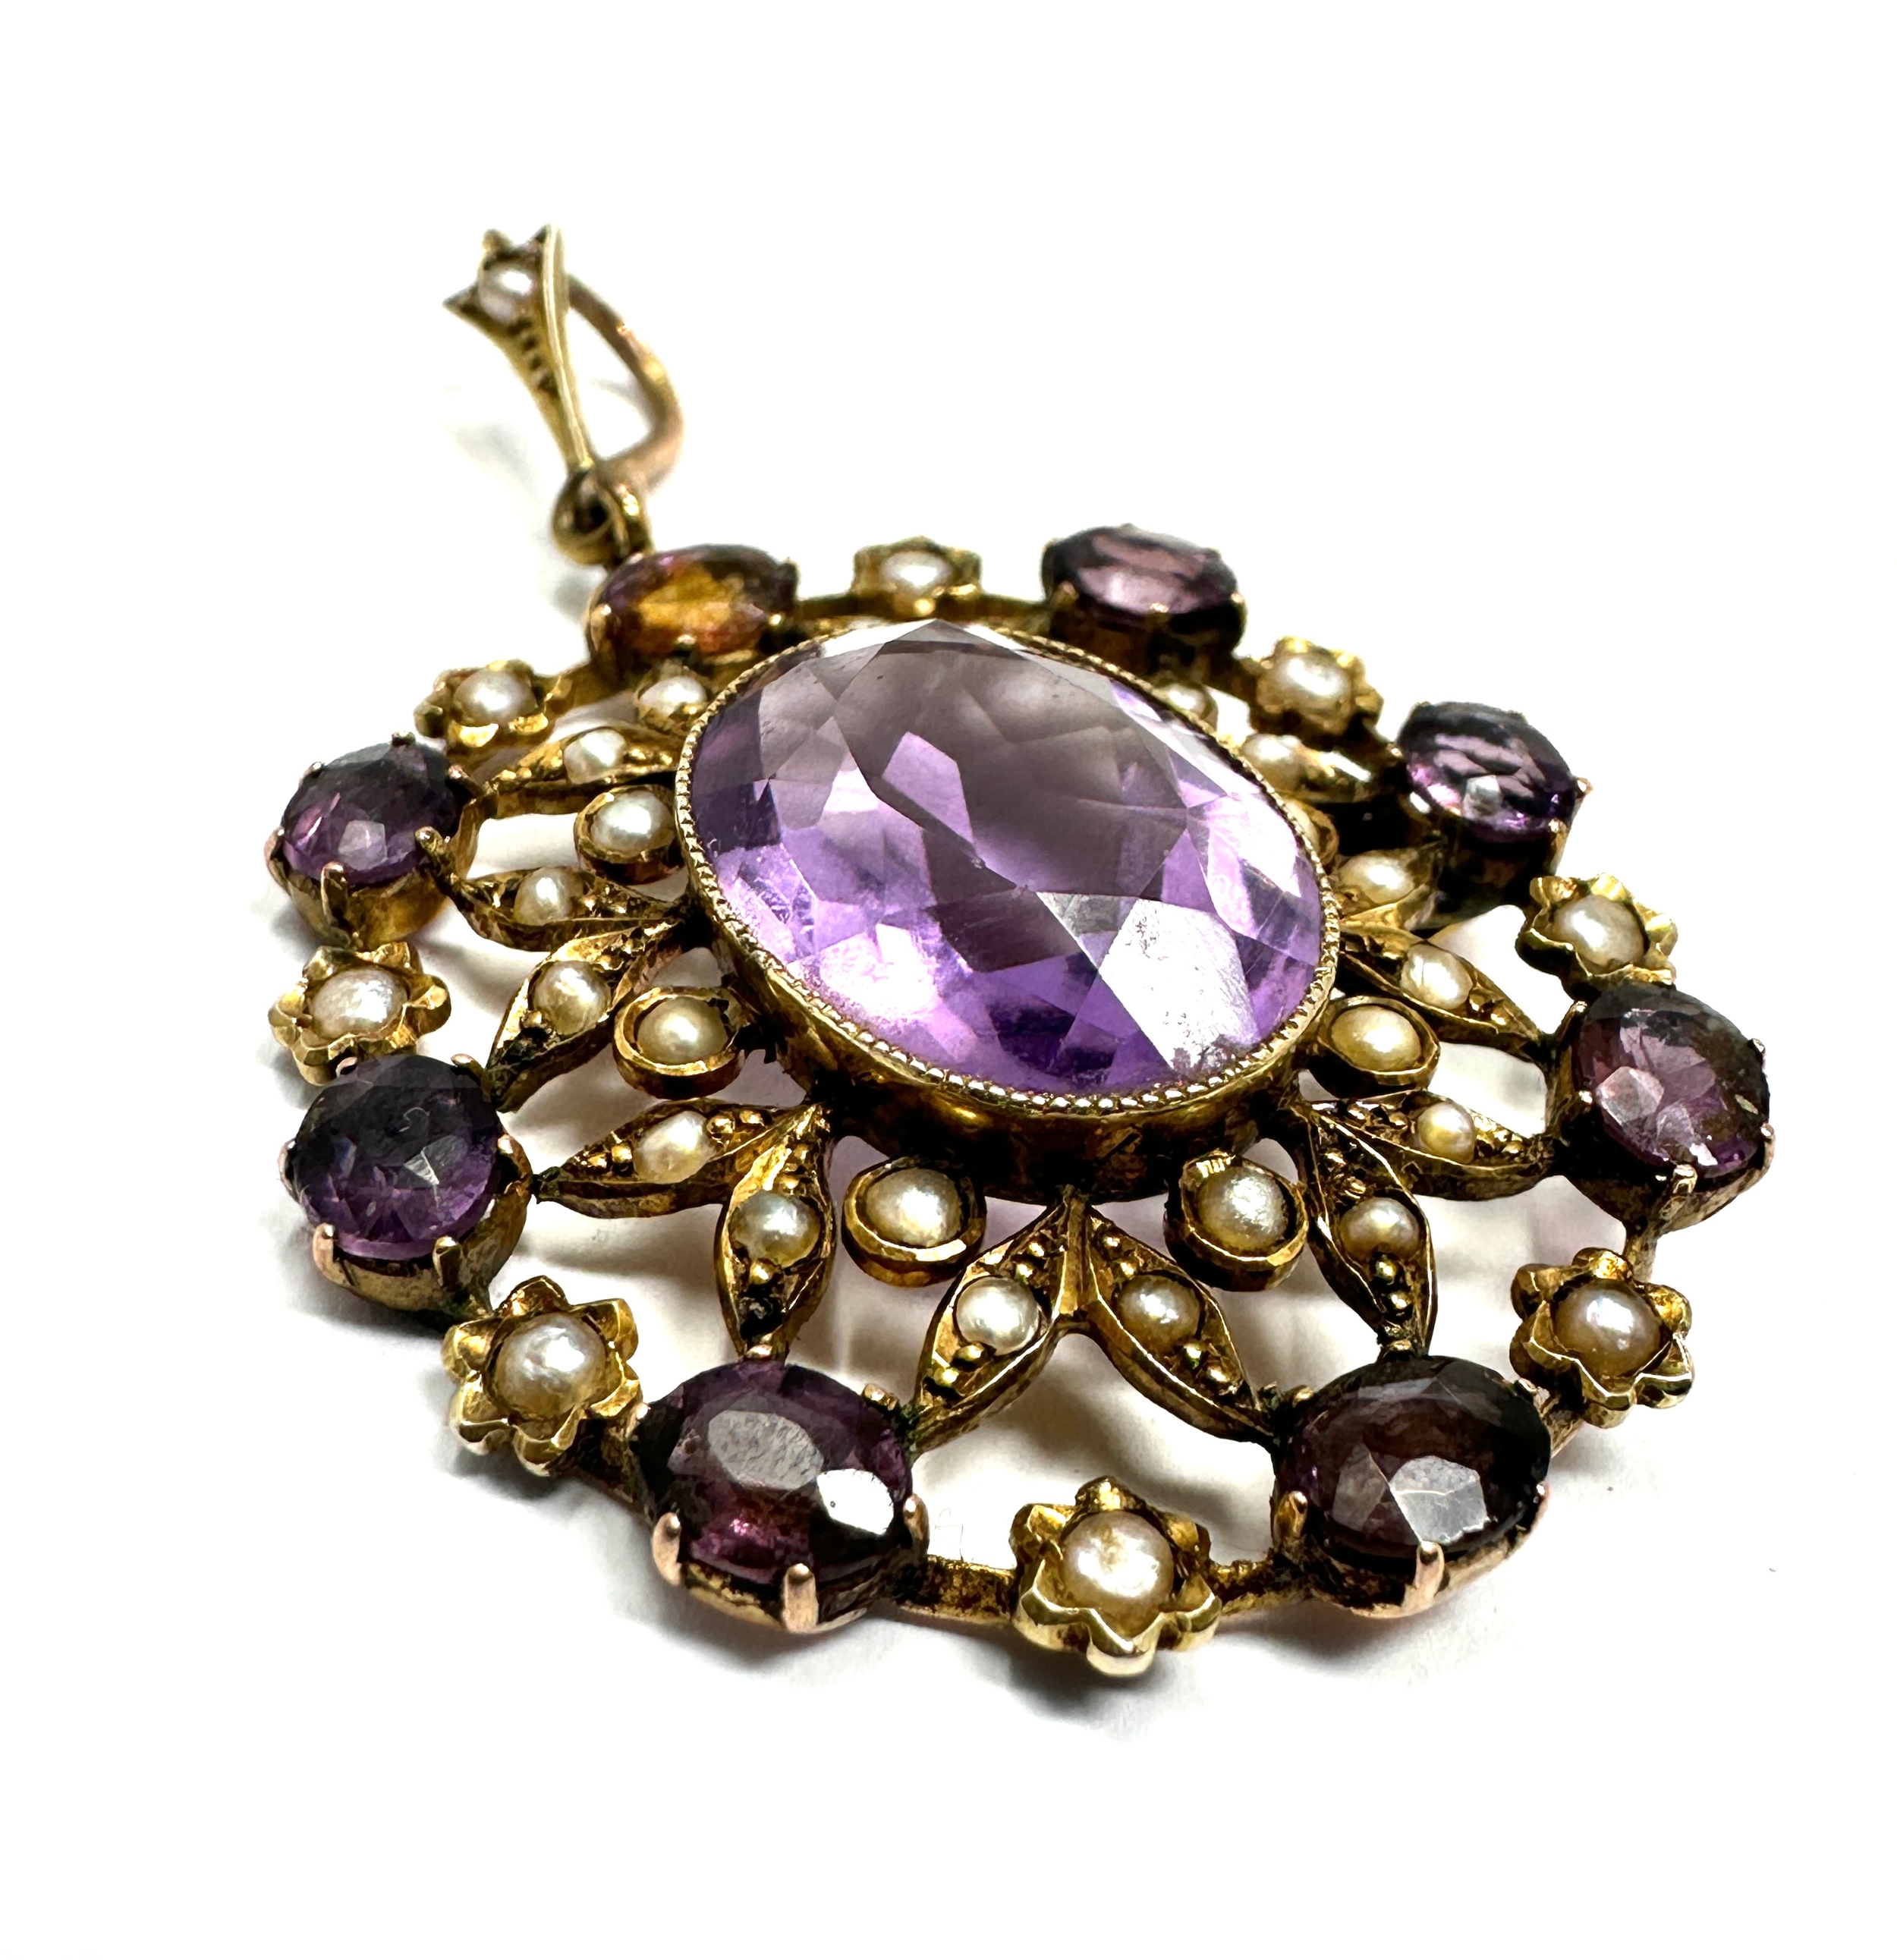 Antique gold amethyst & seed-pearl pendant measures approx 5cm drop by 3cm wide weight 7.4g - Image 2 of 5